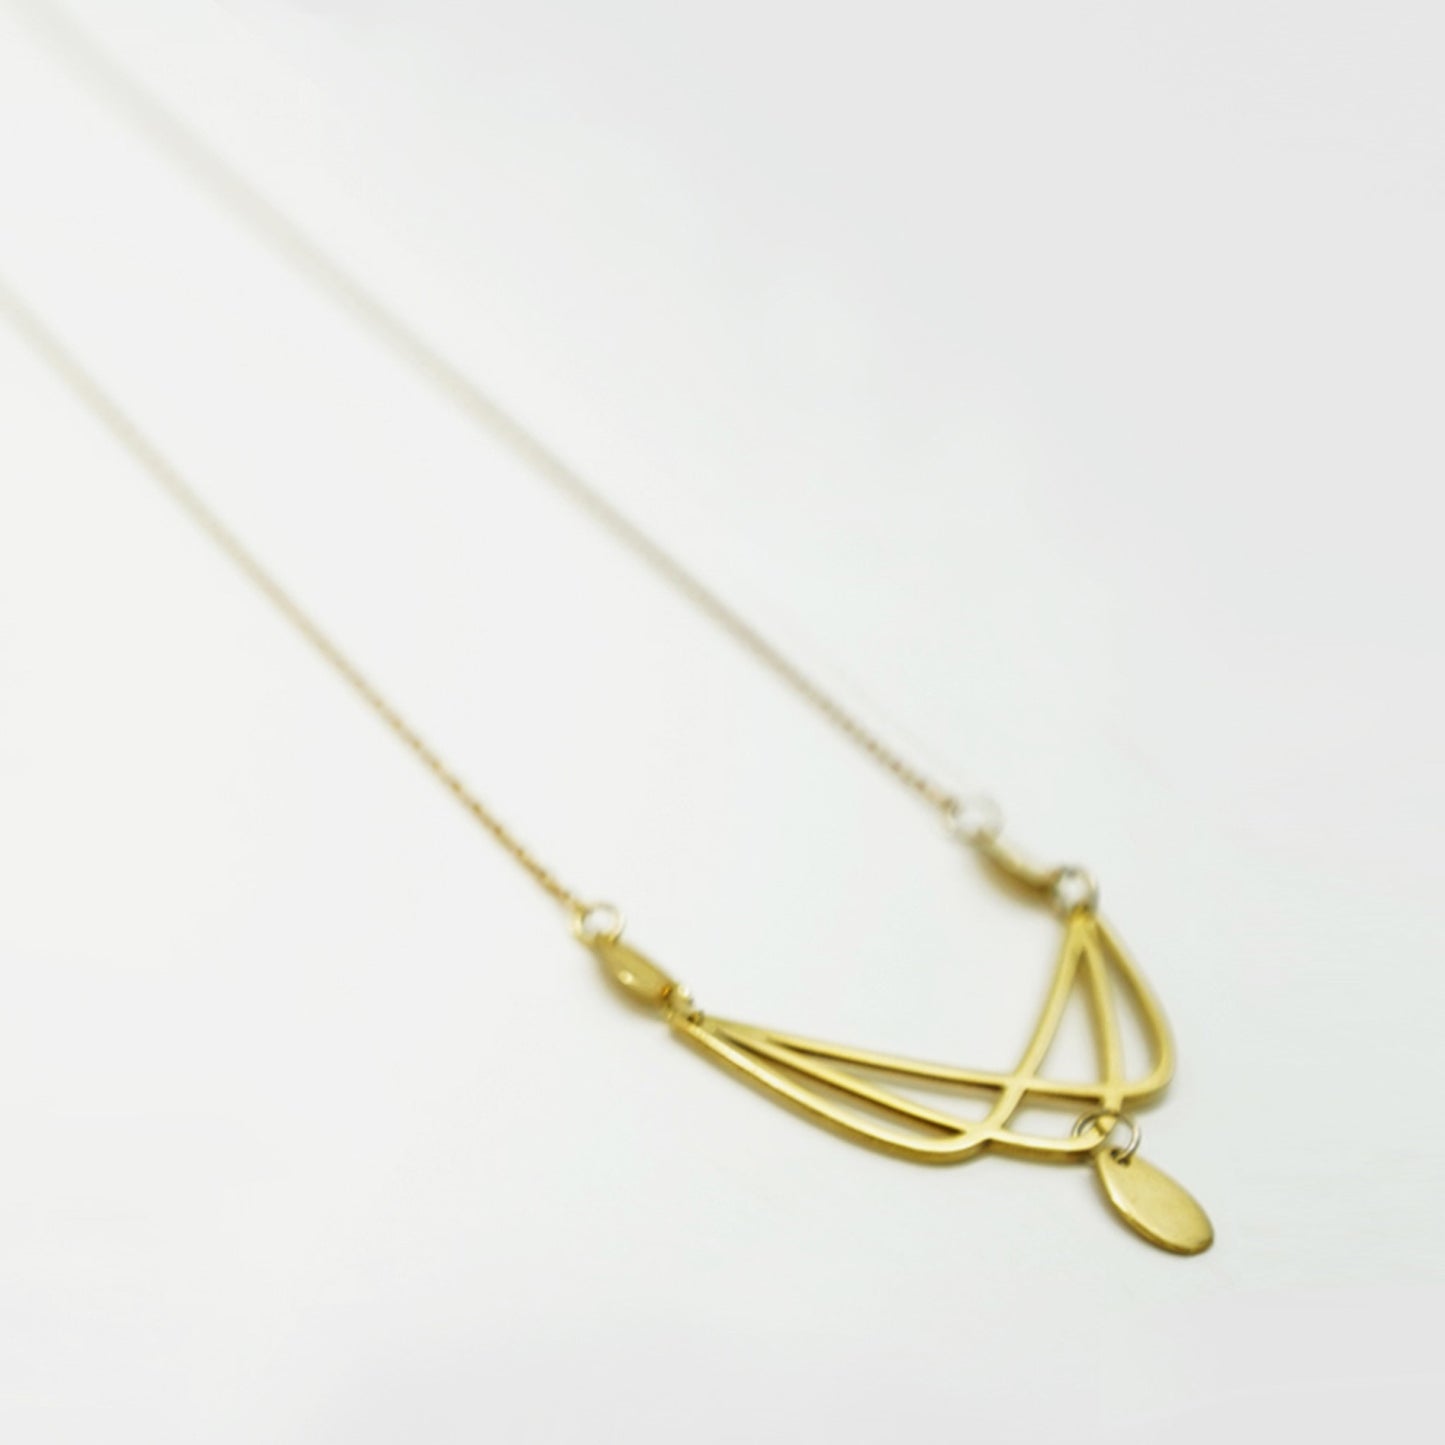 GUIMARD NECKLACE BOOMERANG / silver 925, 18kt gold plated